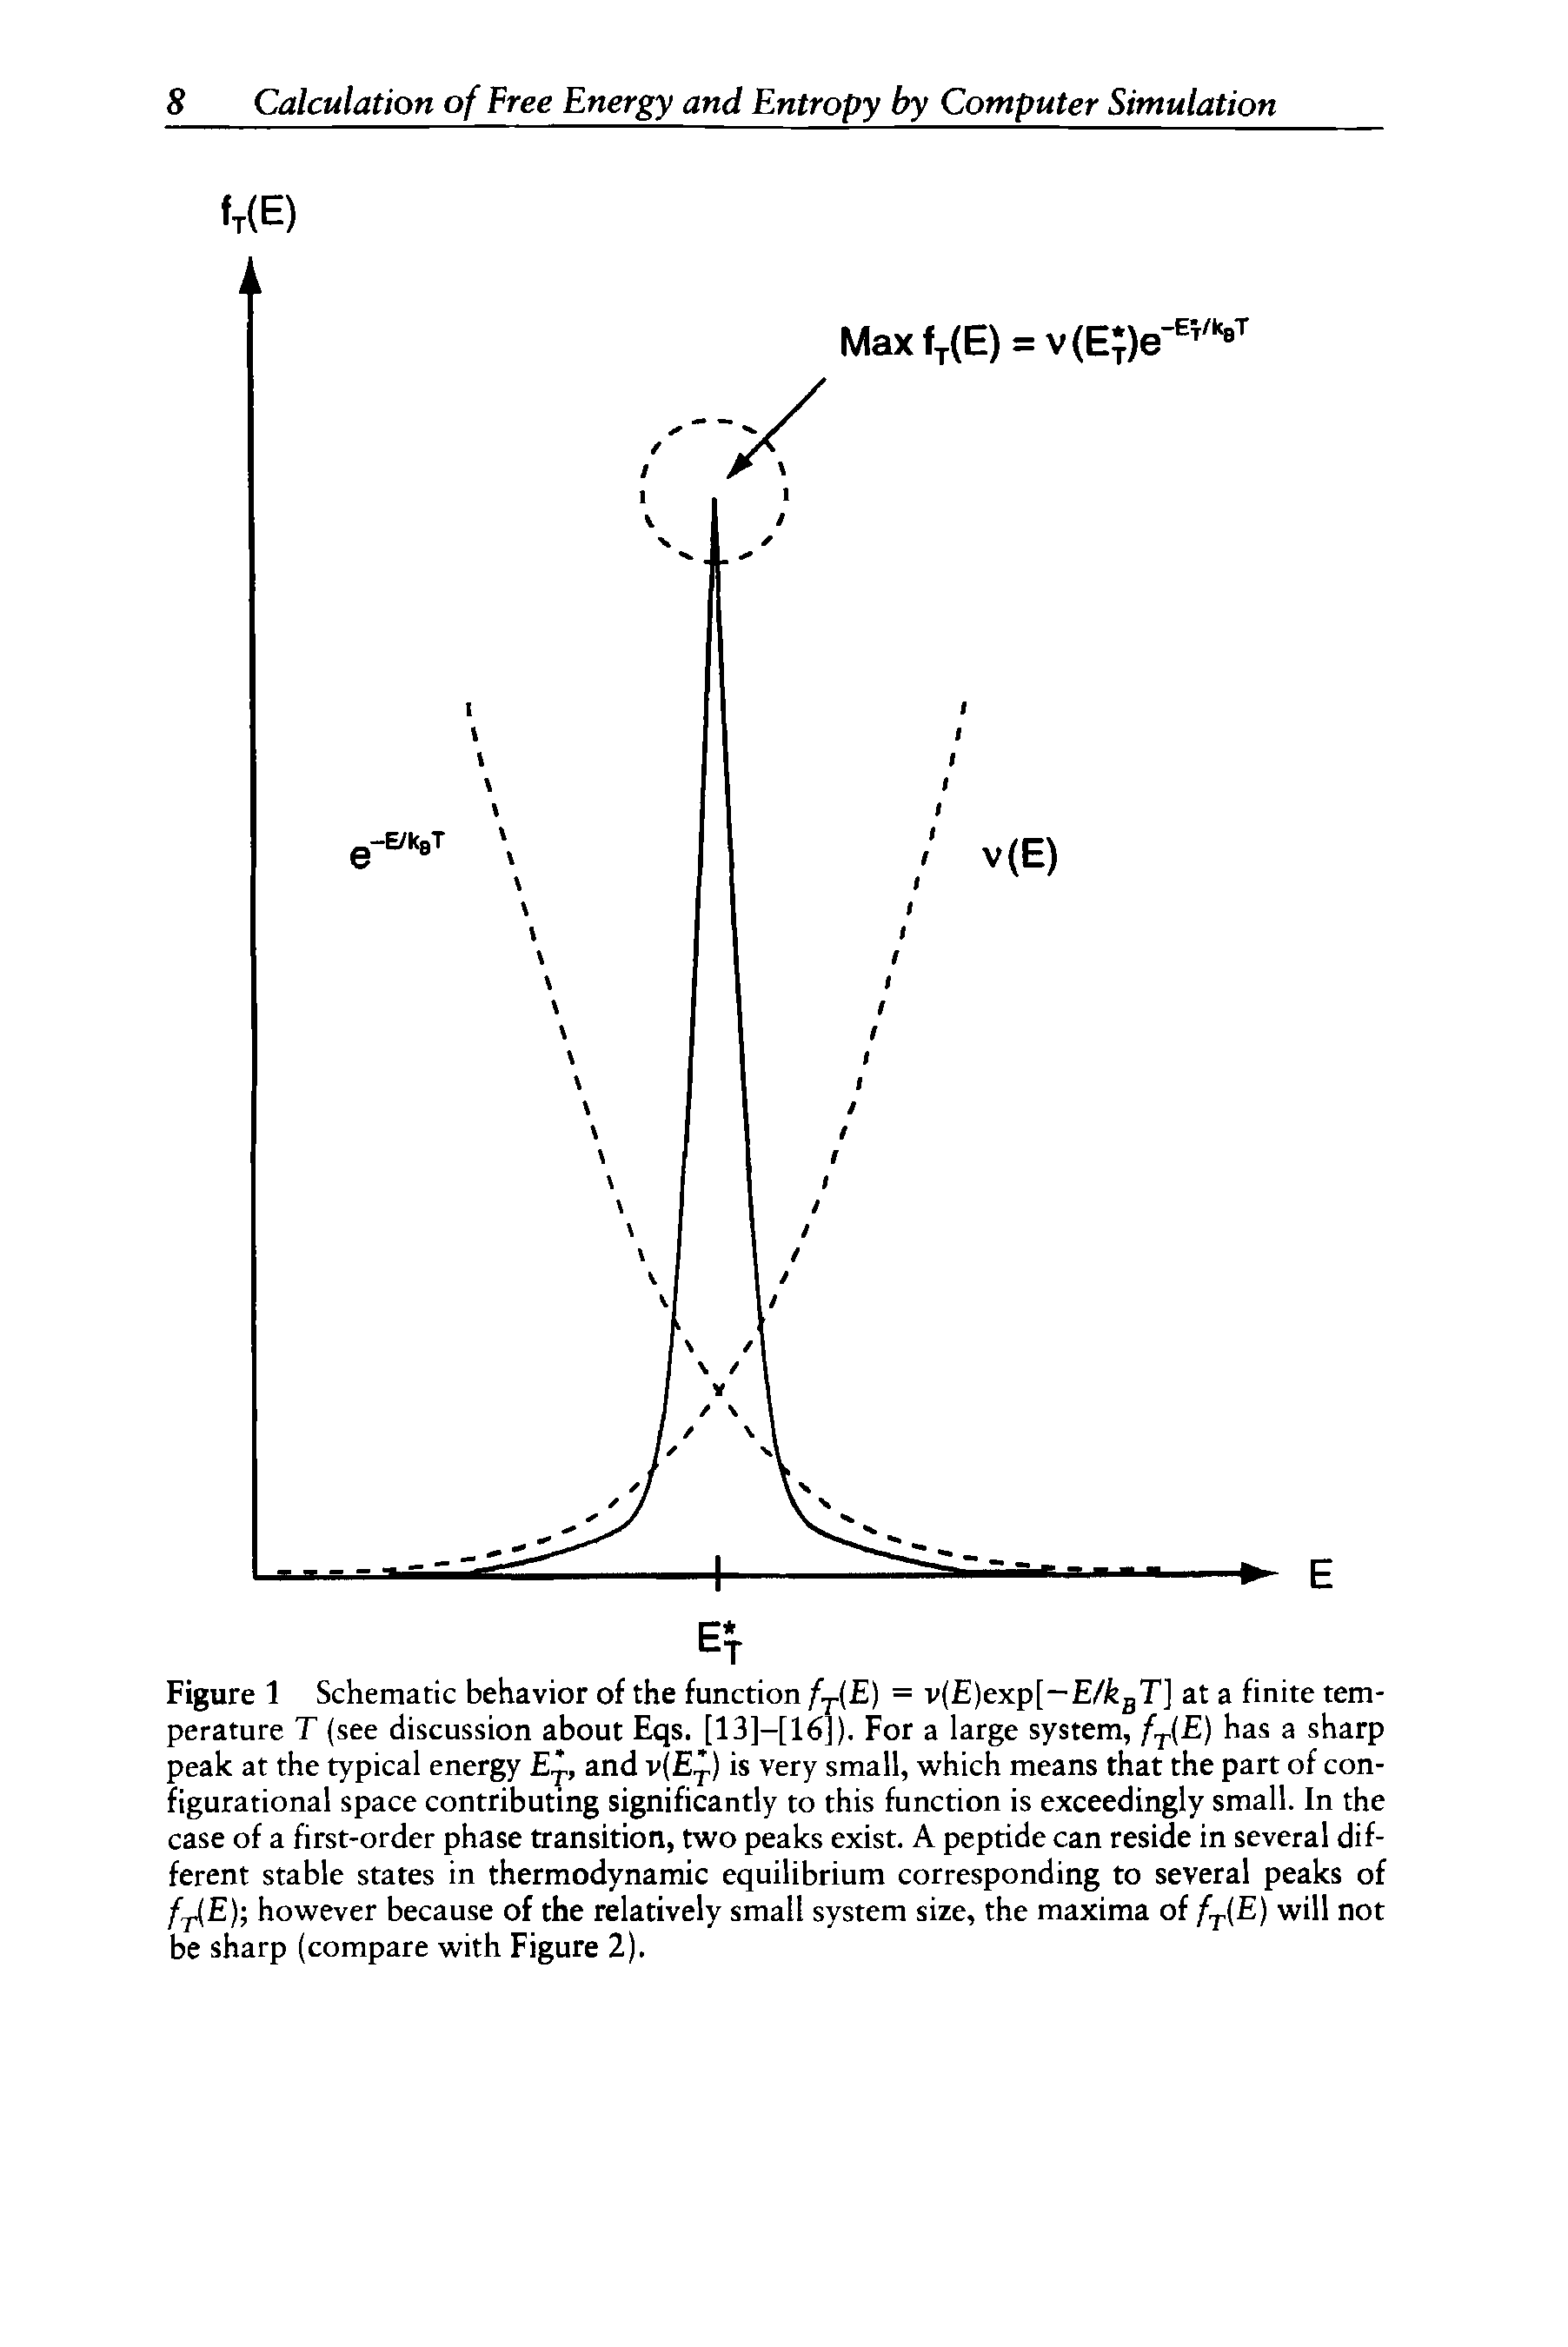 Figure 1 Schematic behavior of the function f-AE) = v( )exp[—E/ gT] at a finite temperature T (see discussion about Eqs. [13]-[16]). For a large system, /ij.( ) has a sharp peak at the typical energy , and v( ) is very small, which means that the part of configurational space contributing significantly to this function is exceedingly small. In the case of a first-order phase transition, two peaks exist. A peptide can reside in several different stable states in thermodynamic equilibrium corresponding to several peaks of / j.( ) however because of the relatively small system size, the maxima of f (E) will not be sharp (compare with Figure 2).